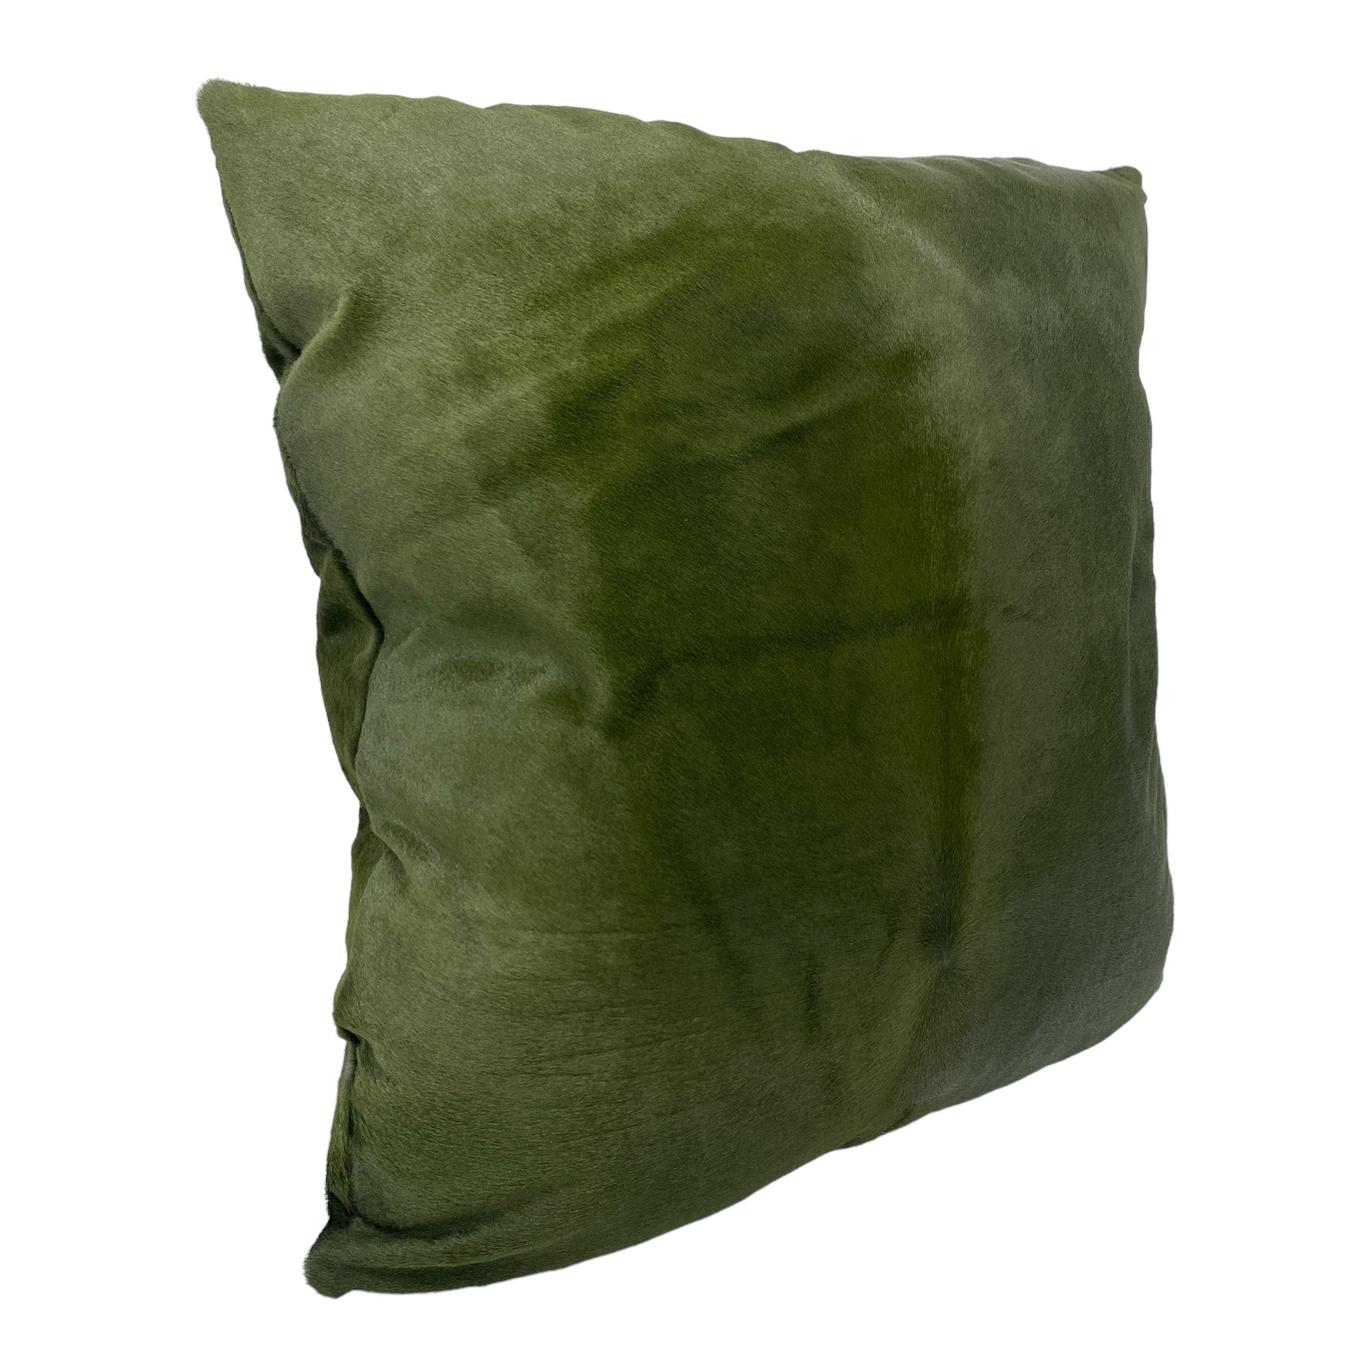 Green Leather Throw Pillow
Introducing our luxurious green pillow featuring a touch of opulence with green leather fur accents. Both sides boast a sumptuous short hair suede texture, ensuring a lavish and tactile experience that adds elegance to any